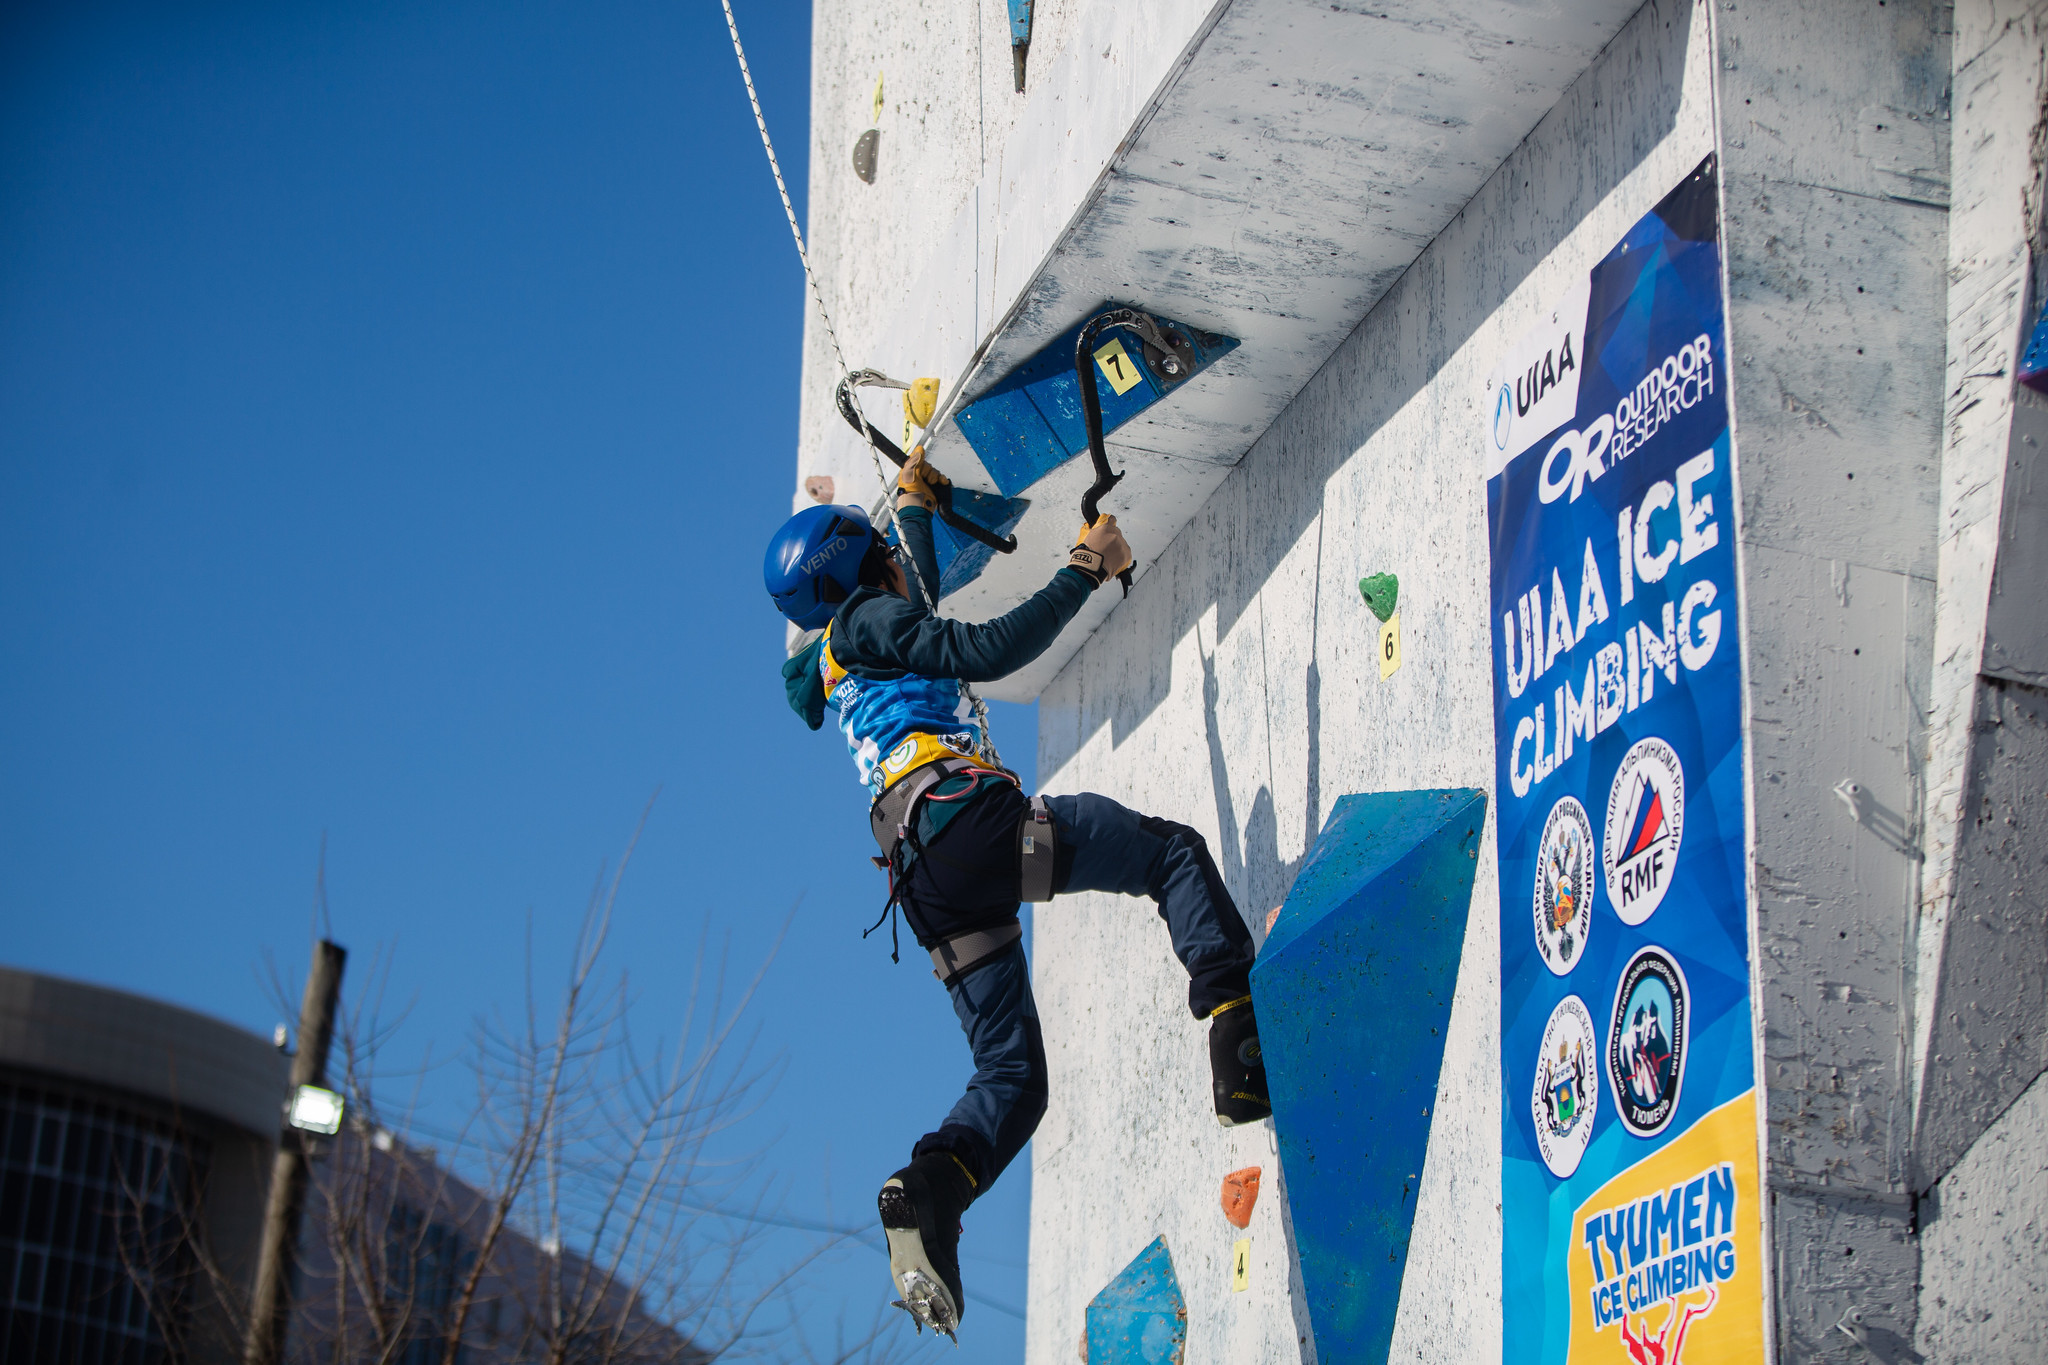 The UIAA Ice Climbing World Championships in Tyumen saw competitions decided in the under-16, under-19 and under-21 categories ©UIAA